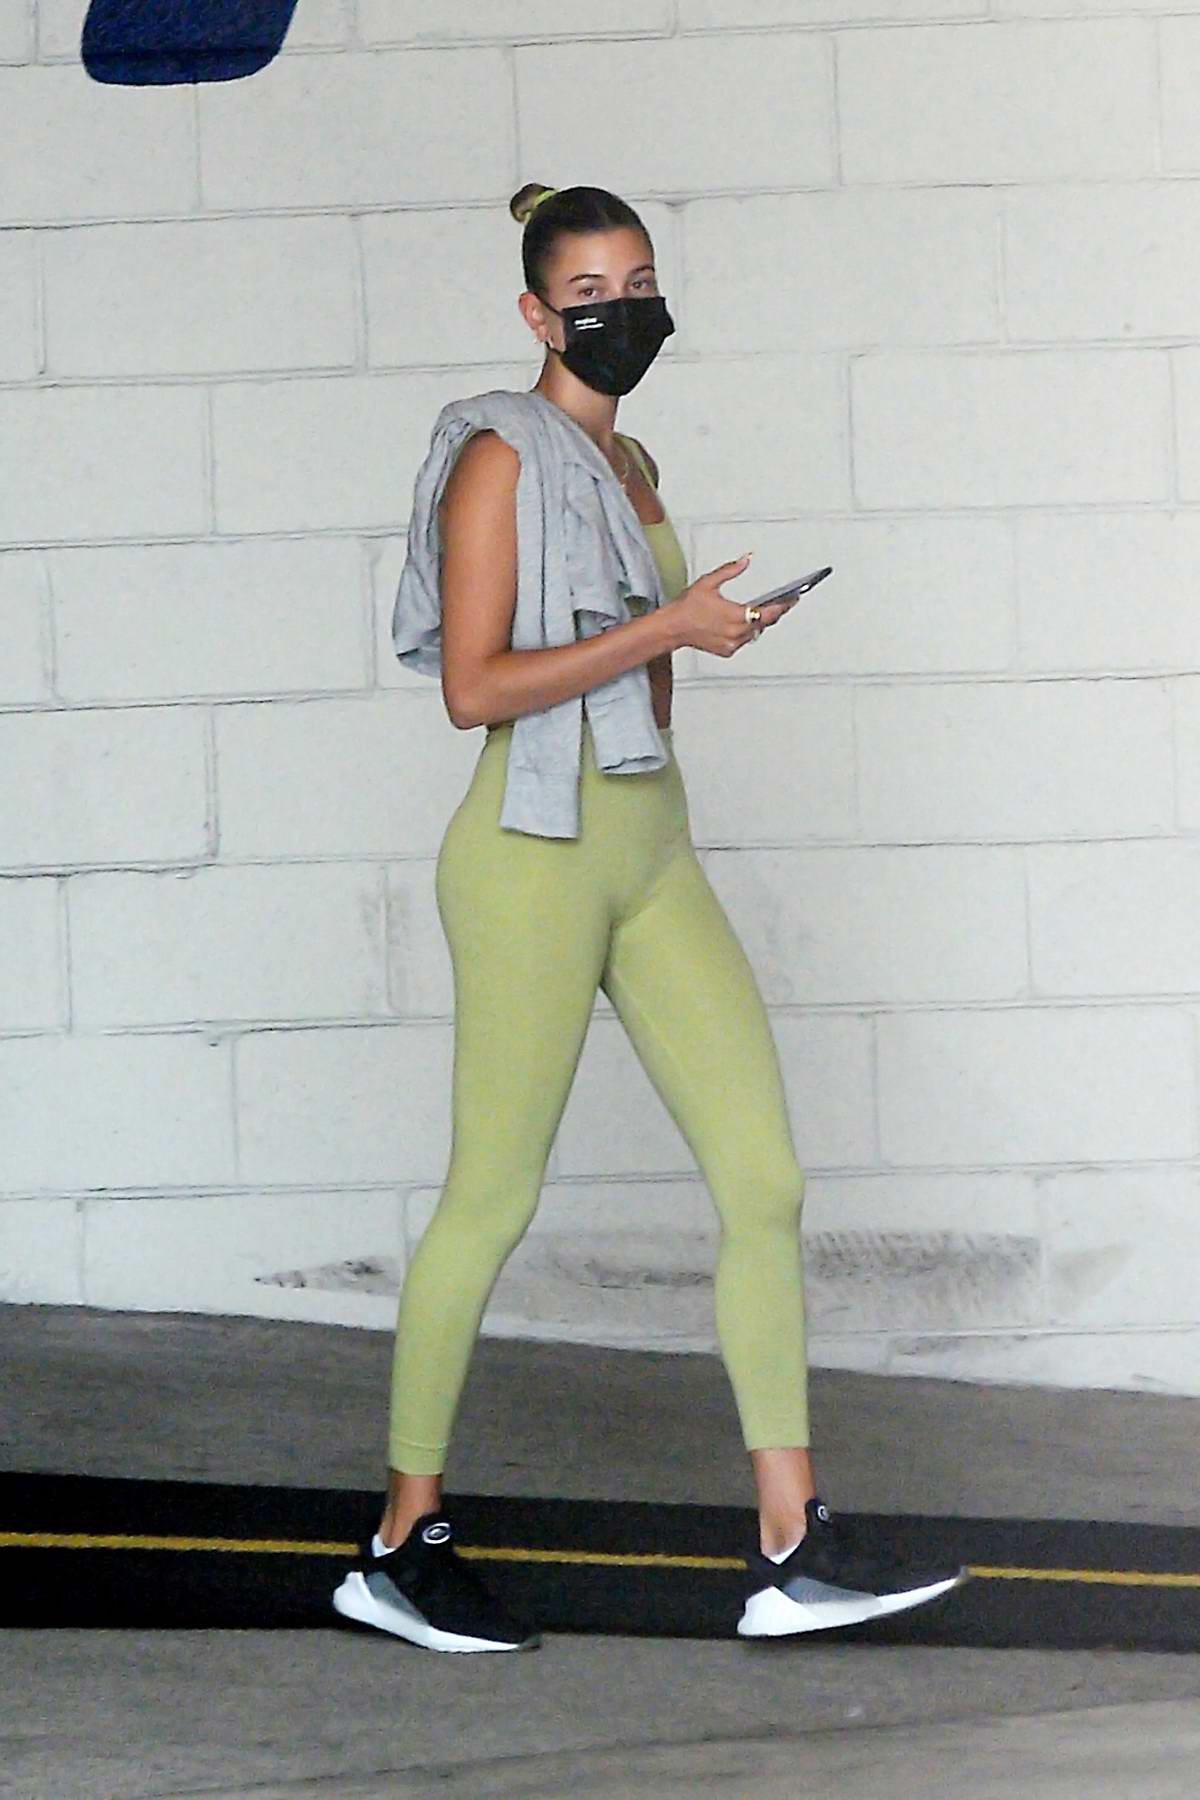 Hailey Bieber sports a green workout top and leggings as she hits the gym  in Los